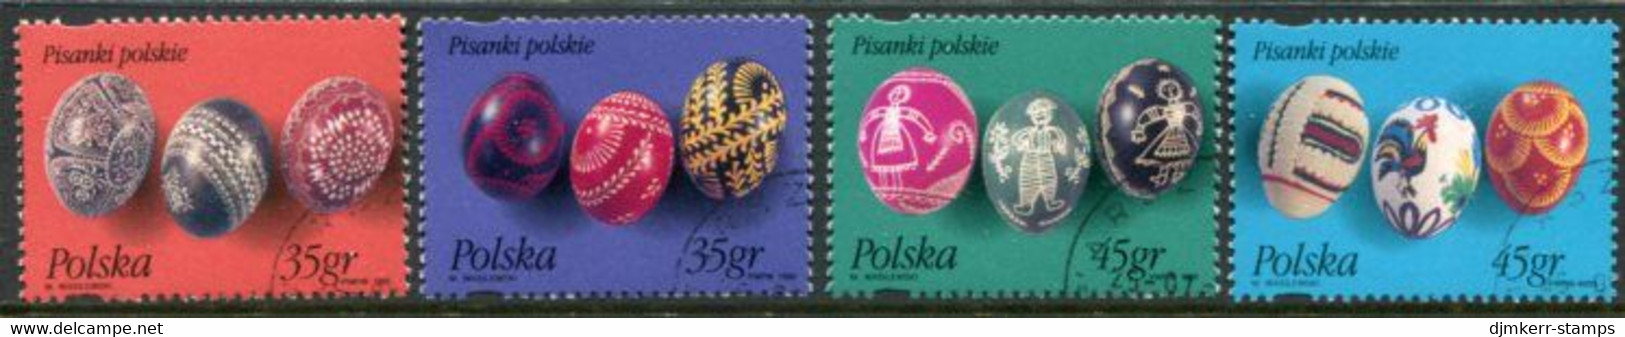 POLAND 1995 Decorated Easter Eggs Used.  Michel 3526-29 - Usati